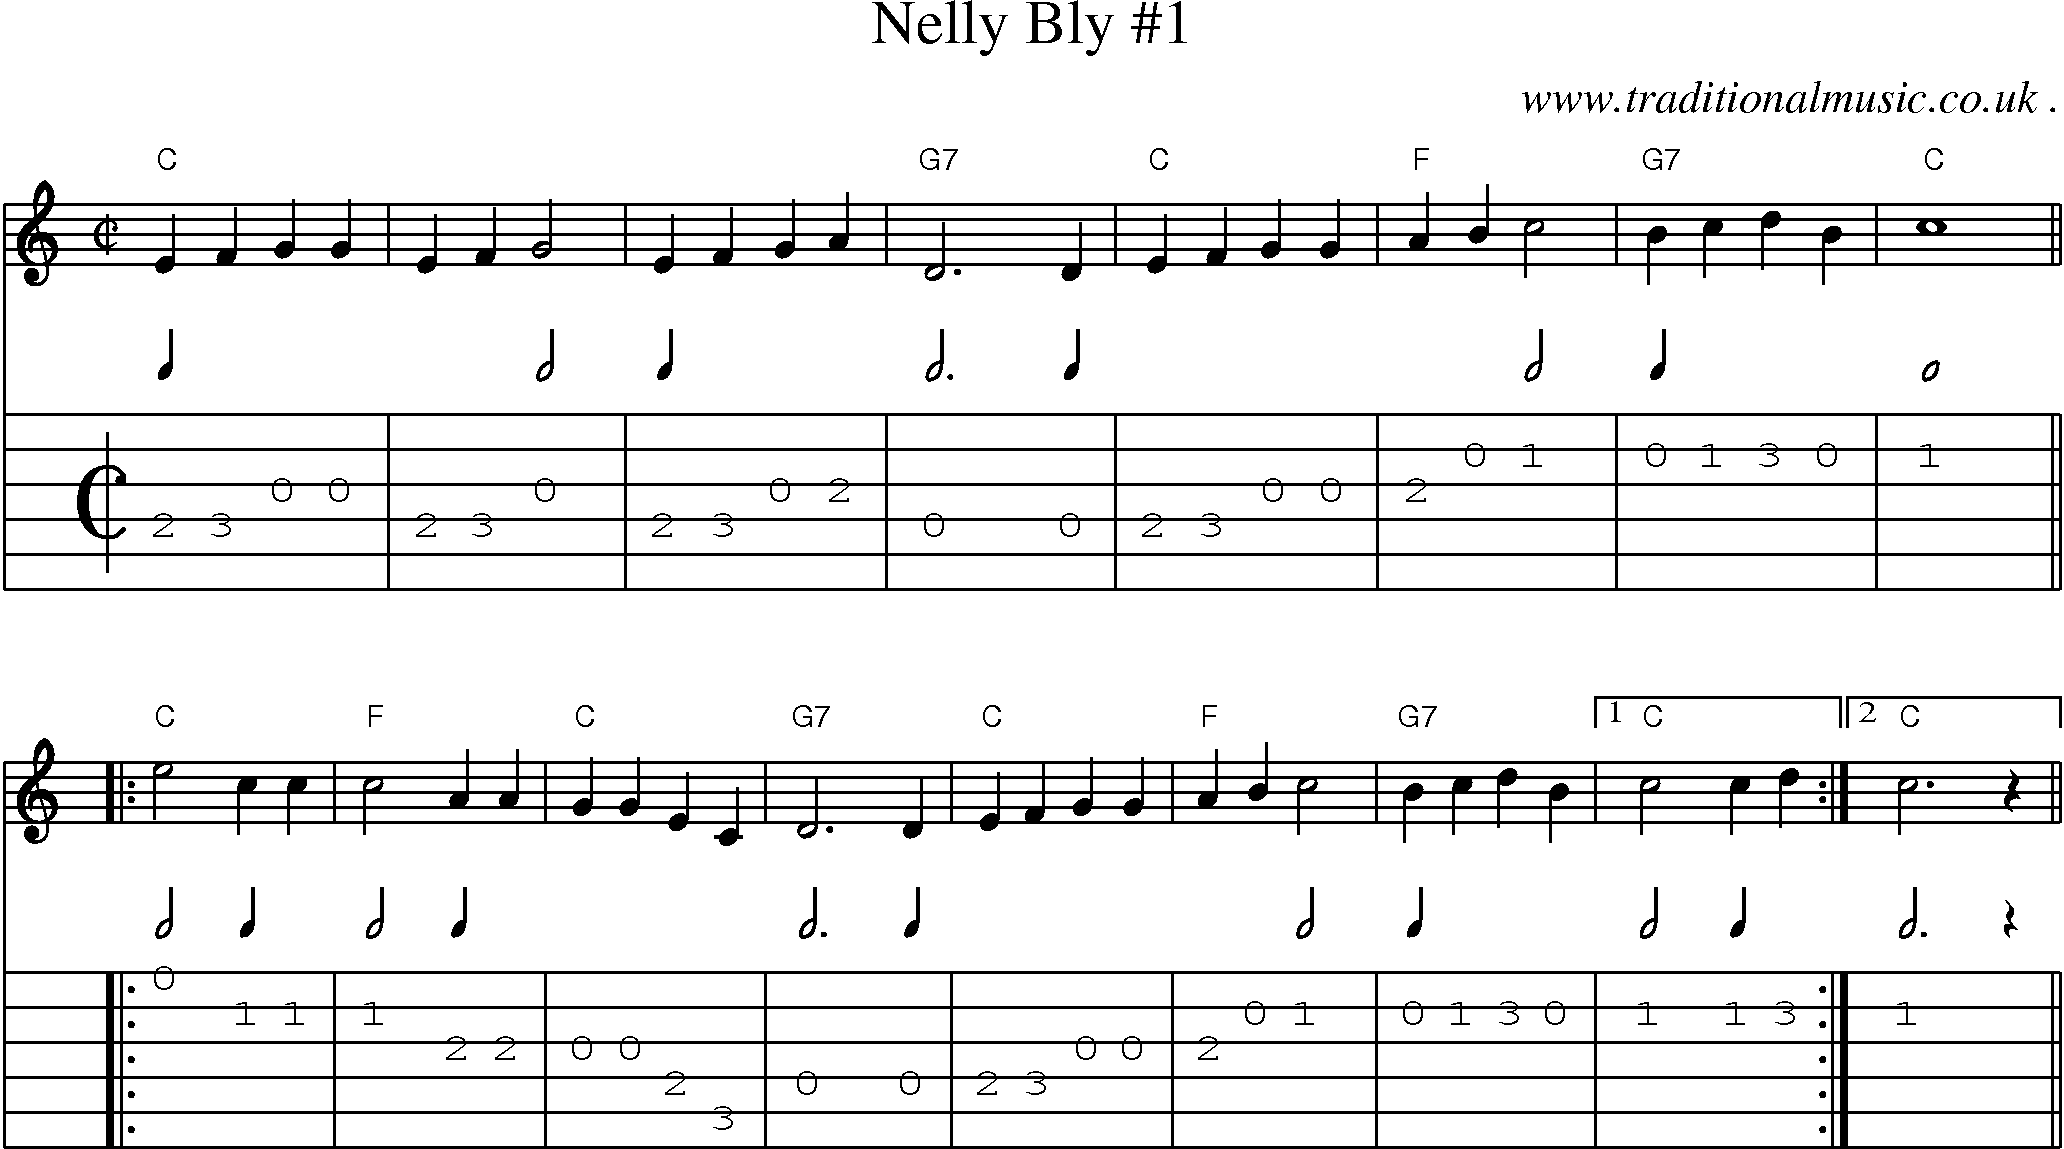 Music Score and Guitar Tabs for Nelly Bly 1